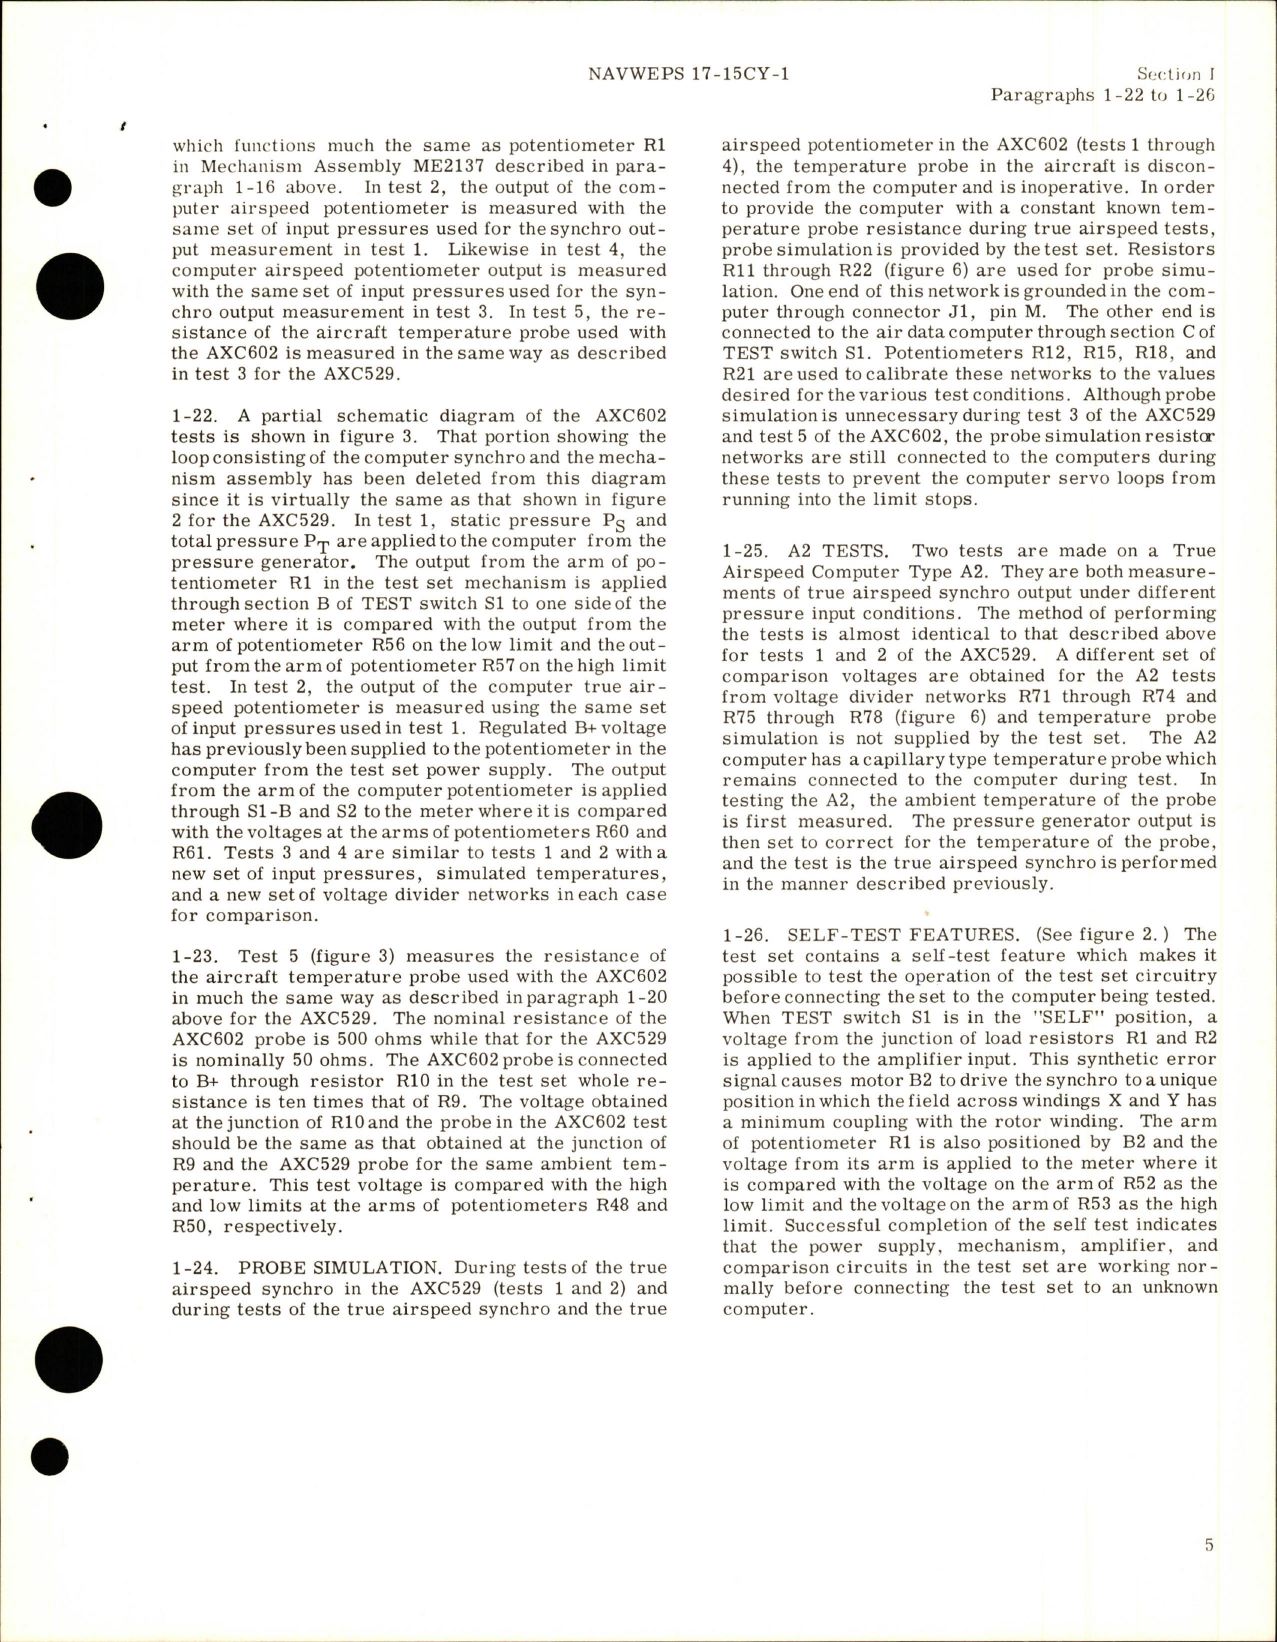 Sample page 9 from AirCorps Library document: Operation, Service Instructions and Illustrated Parts Breakdown for True Airspeed Computer Test Set - Type WS2061 - Part 817306